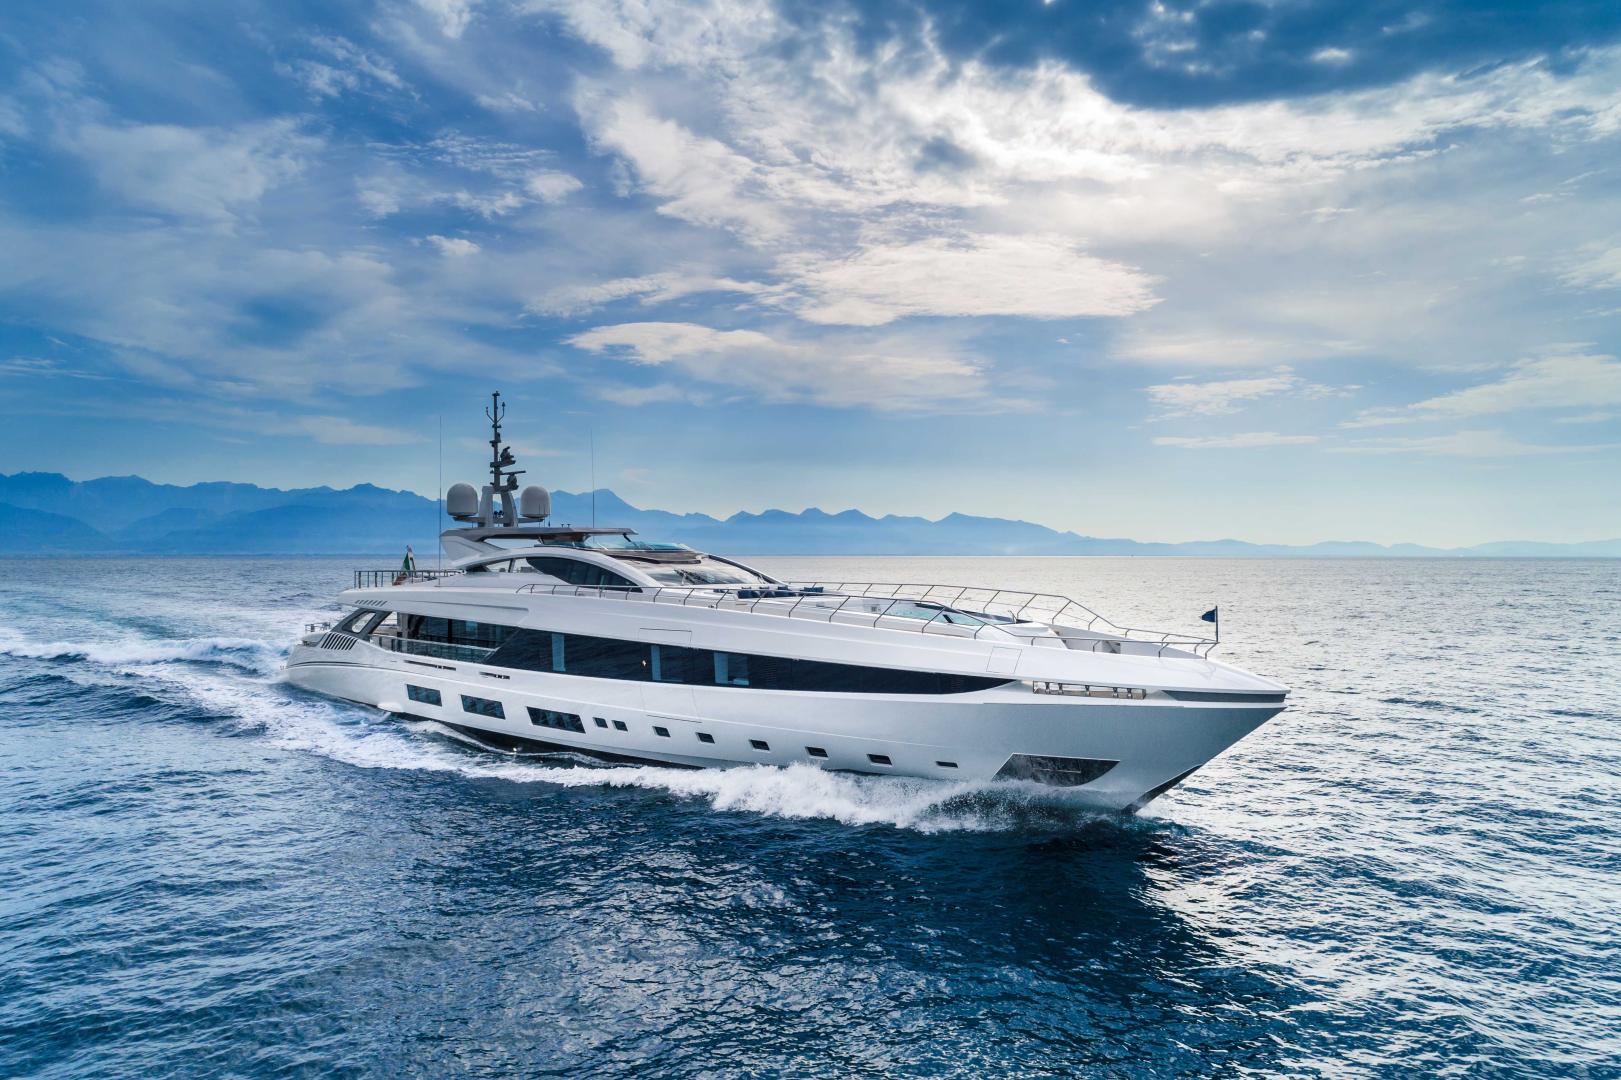 Mangusta Gransport EL LEON was awarded the Yacht & Aviation Awards 2019 as the best 'Power Yacht Over 40 Metres'